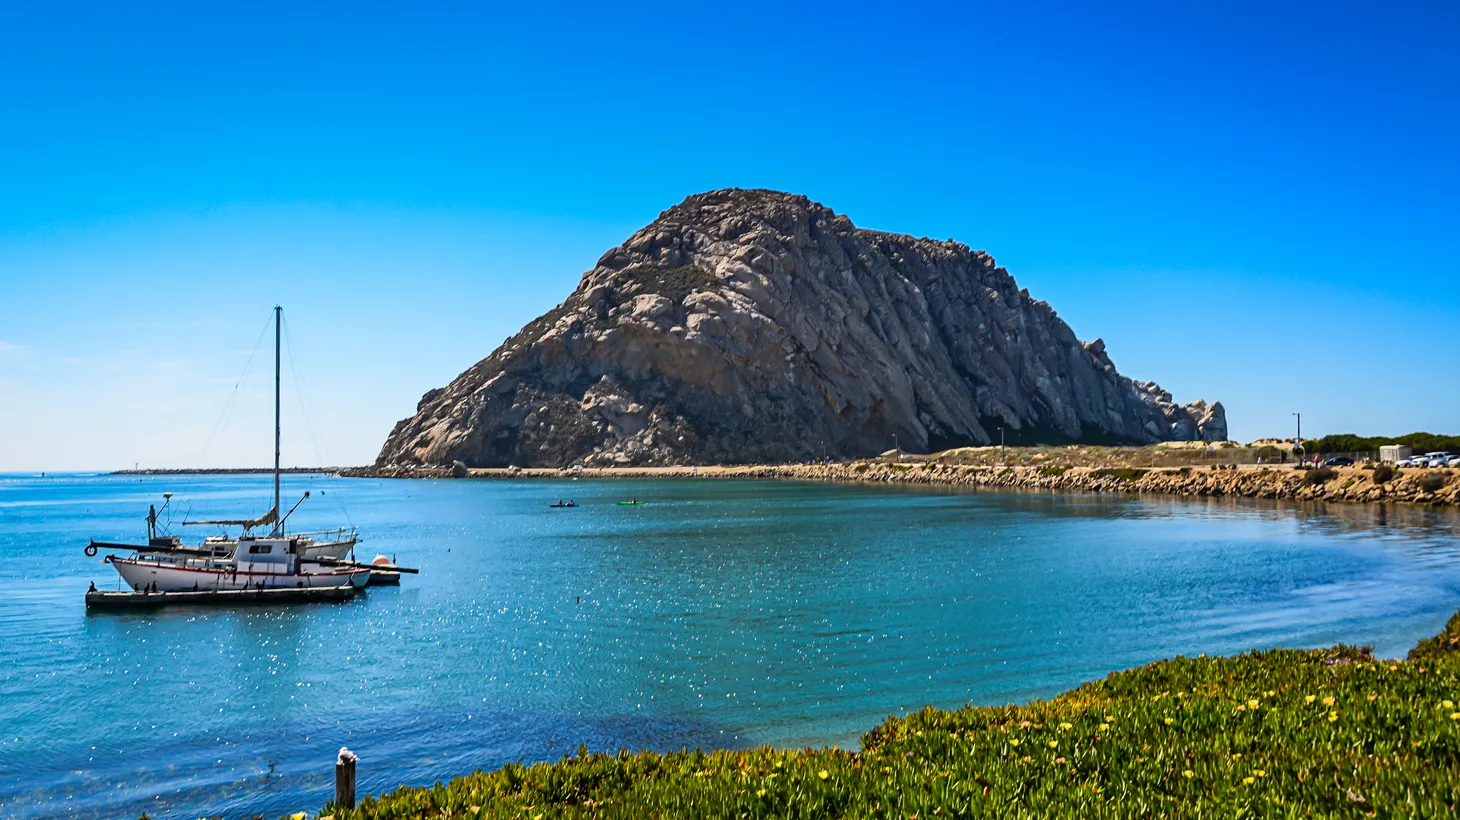 One of California's first off-shore wind farms will be built off the coast of Morro Bay. But a recent lease auction ignored years of collaboration between the community and its preferred bidder.